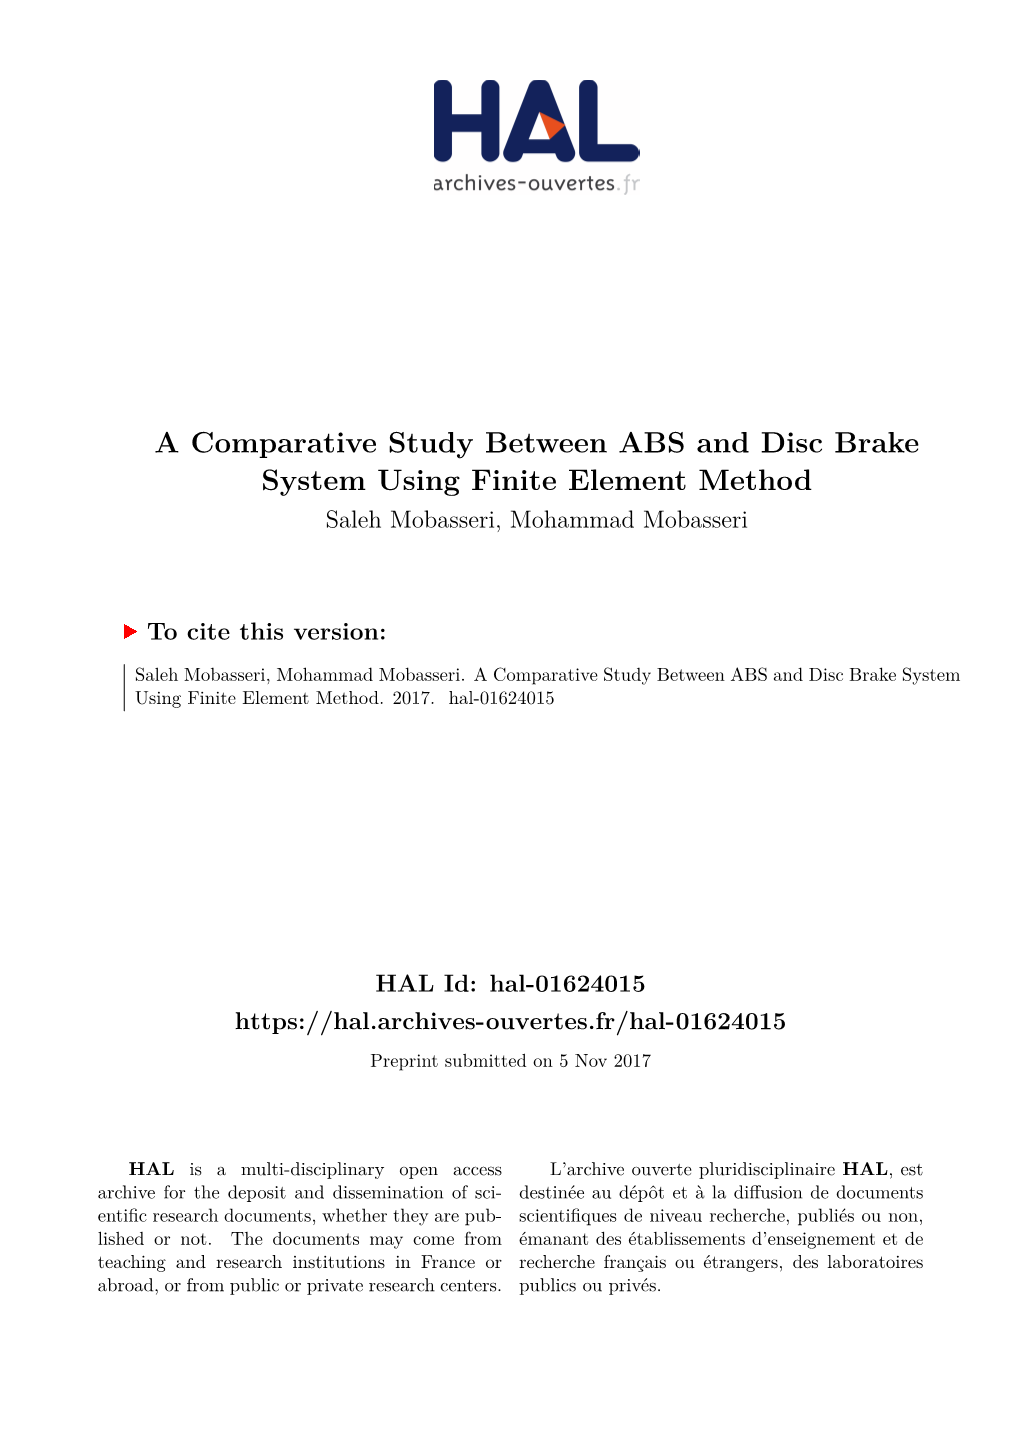 A Comparative Study Between ABS and Disc Brake System Using Finite Element Method Saleh Mobasseri, Mohammad Mobasseri